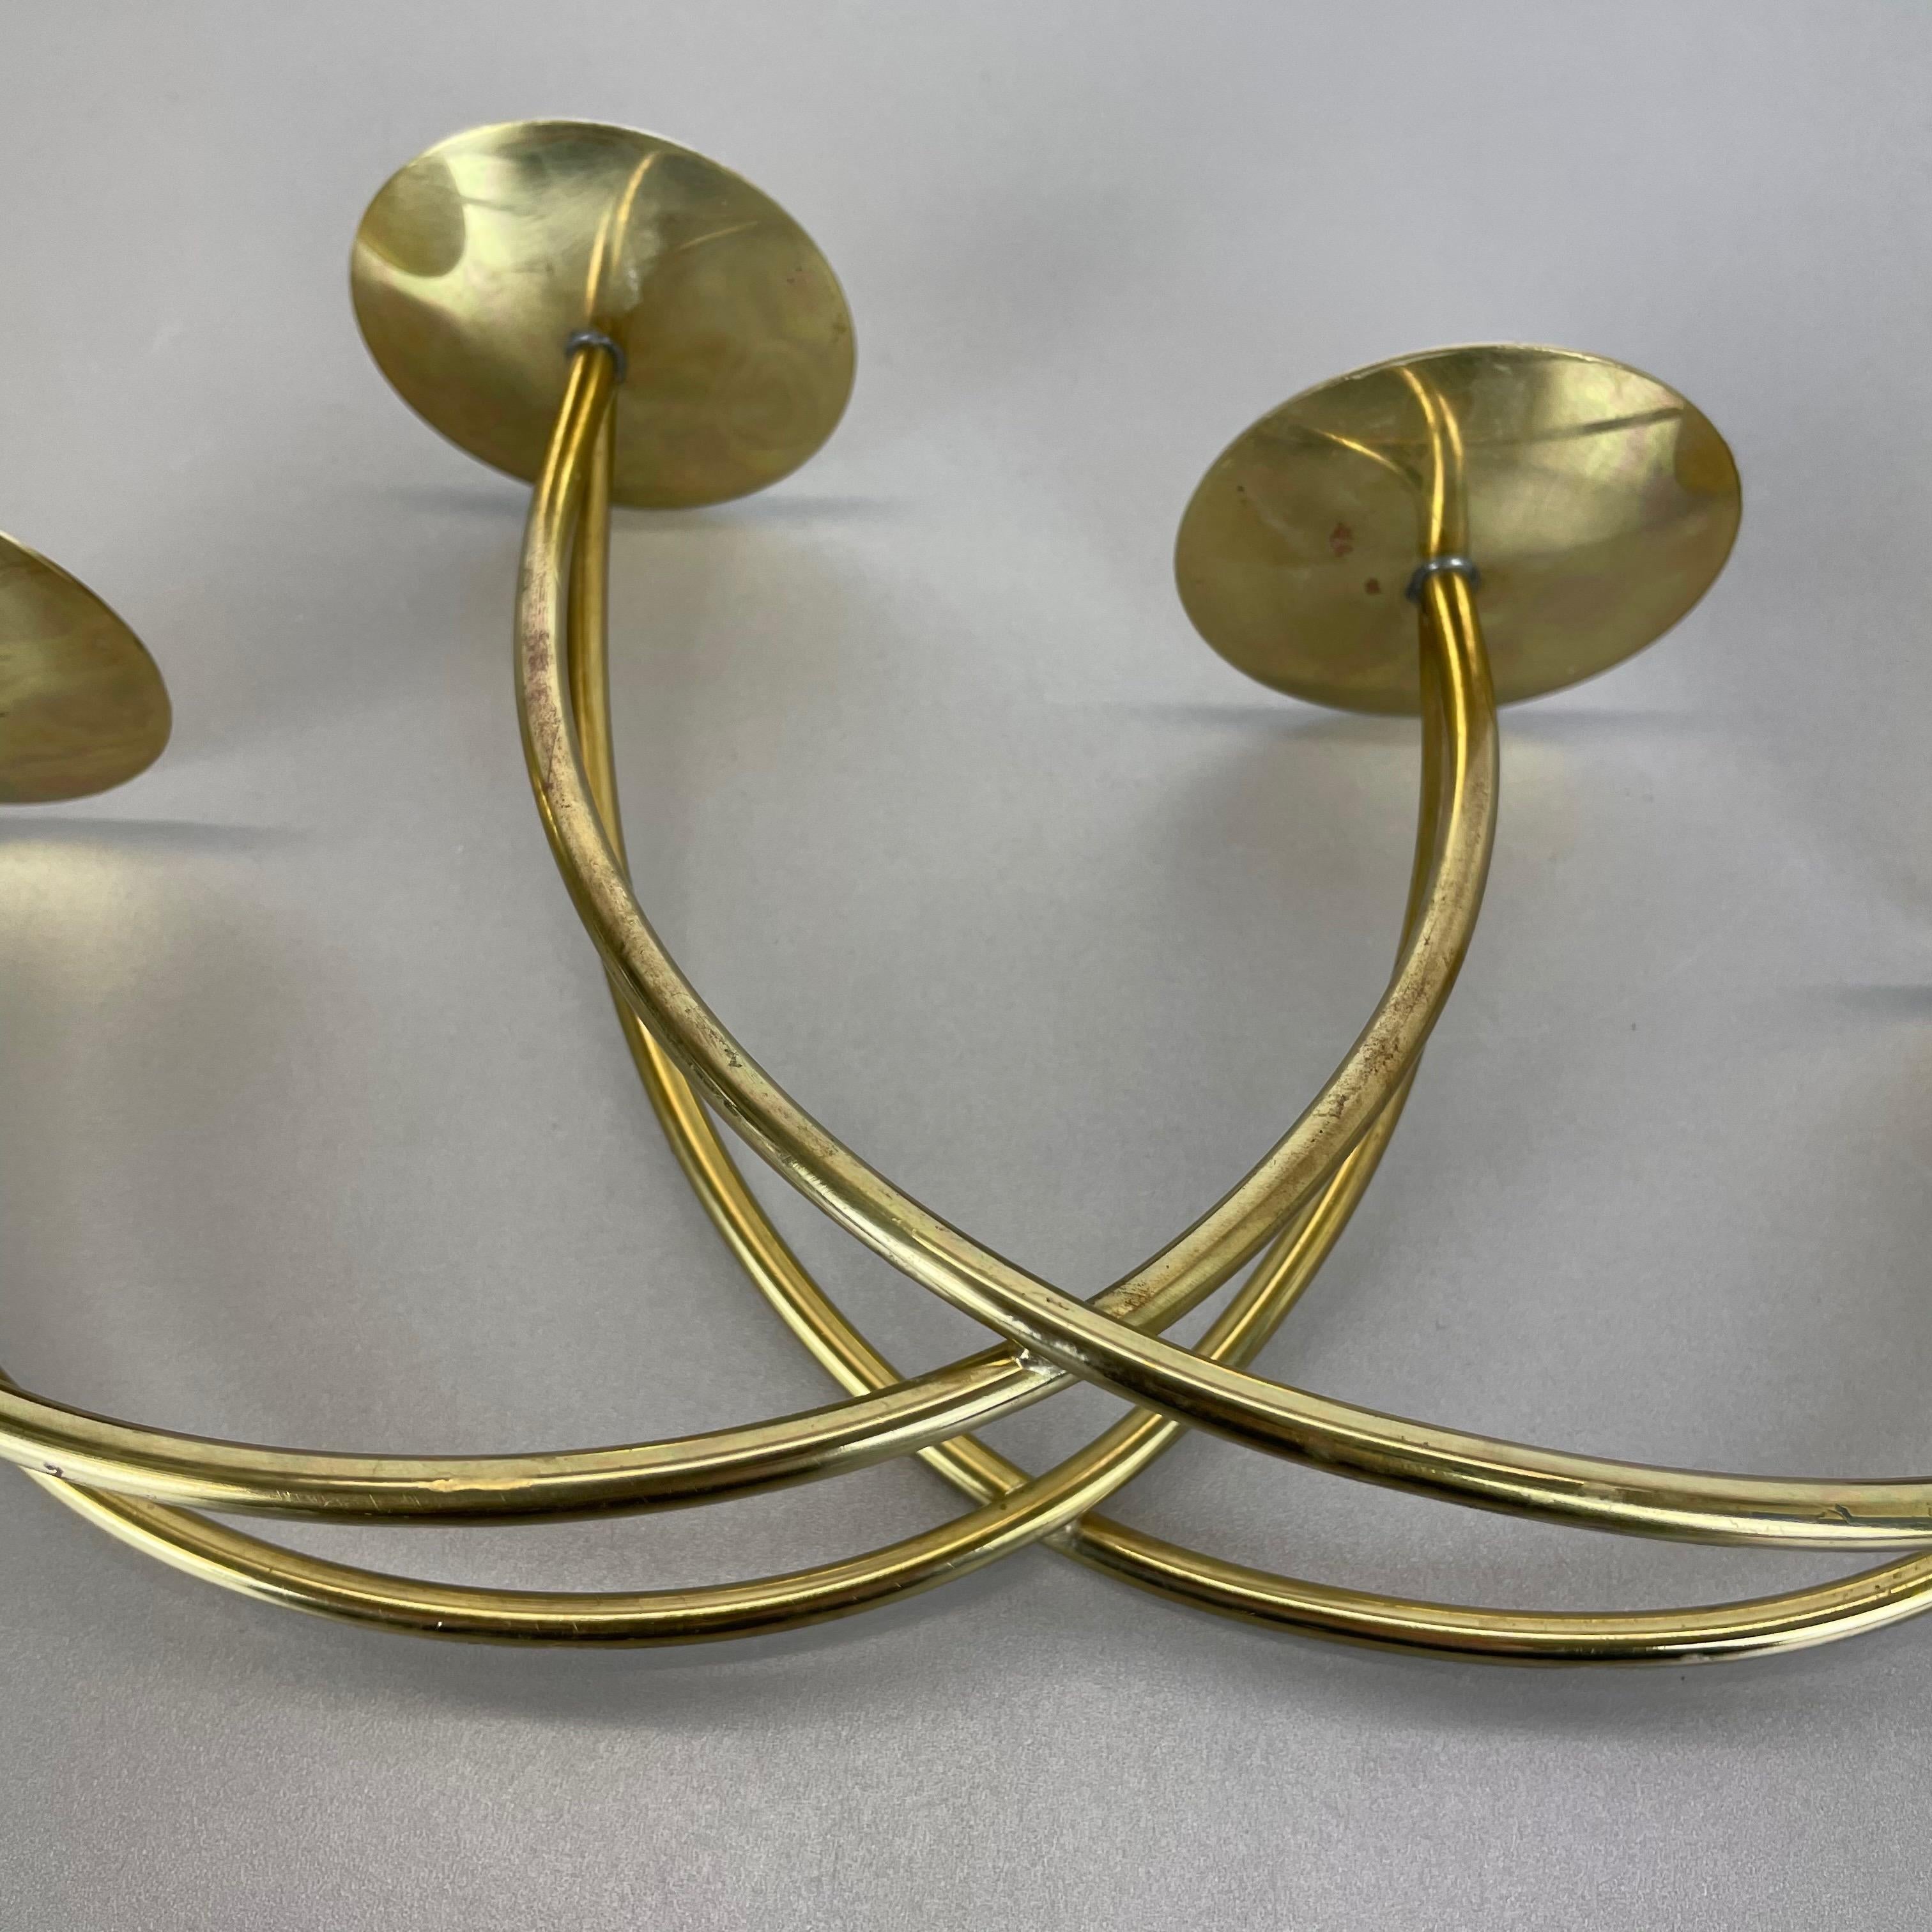 Sculptural Solid Brass Candleholder by Harald Buchrucker Bauhaus, Germany, 1950s For Sale 12